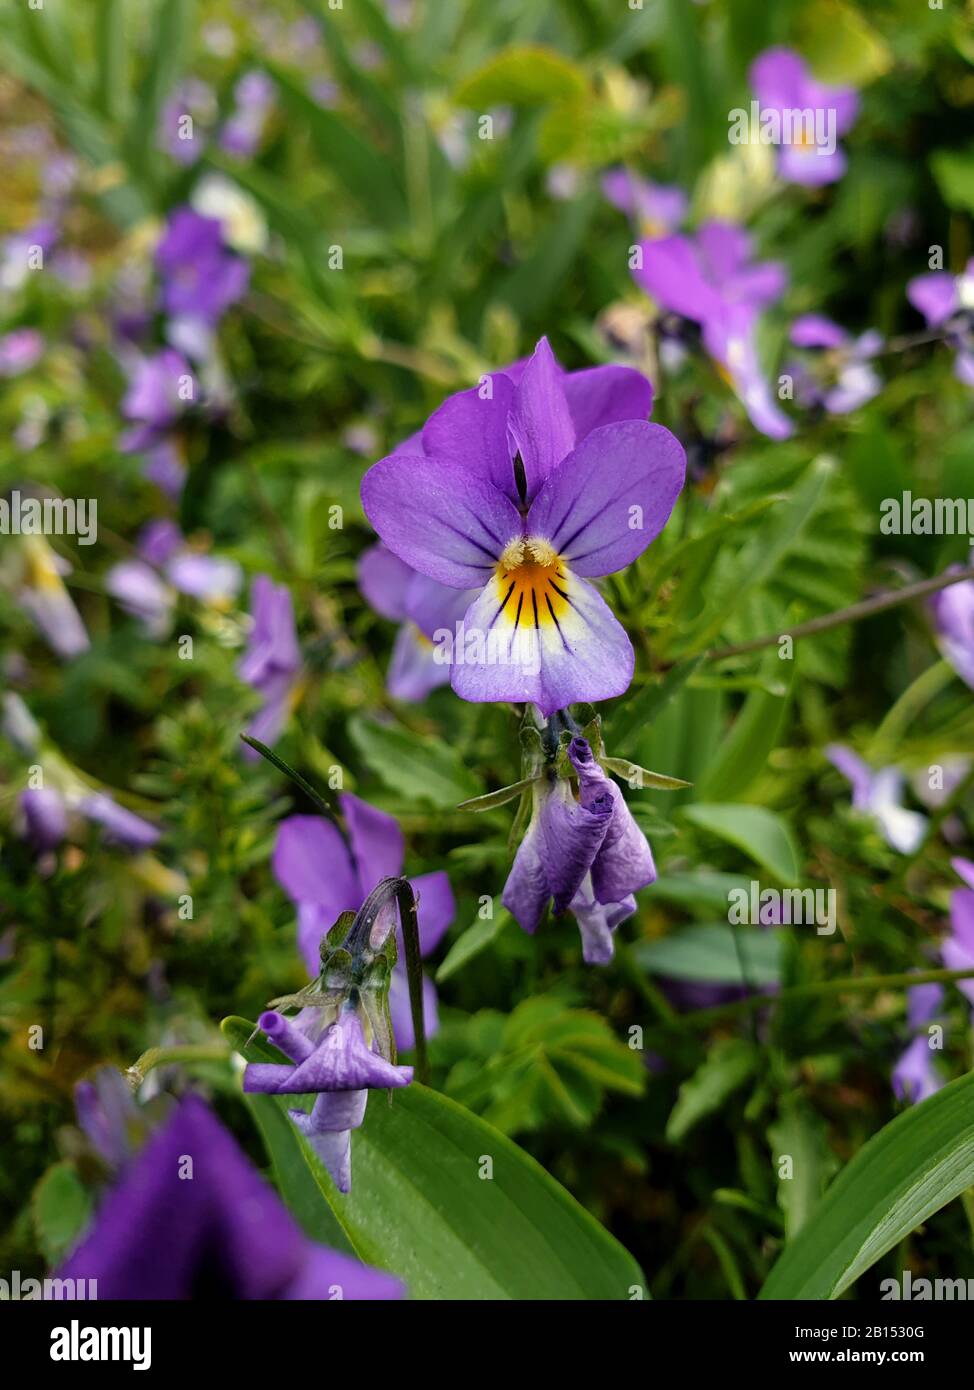 Heartsease, Heart's ease, Heart's delight, Tickle-my-fancy, Wild pansy,  Jack-jump-up-and-kiss-me, Come-and-cuddle-me, Three faces in a hood,  Love-in-idleness (Viola tricolor), blooming, Netherlands Stock Photo - Alamy